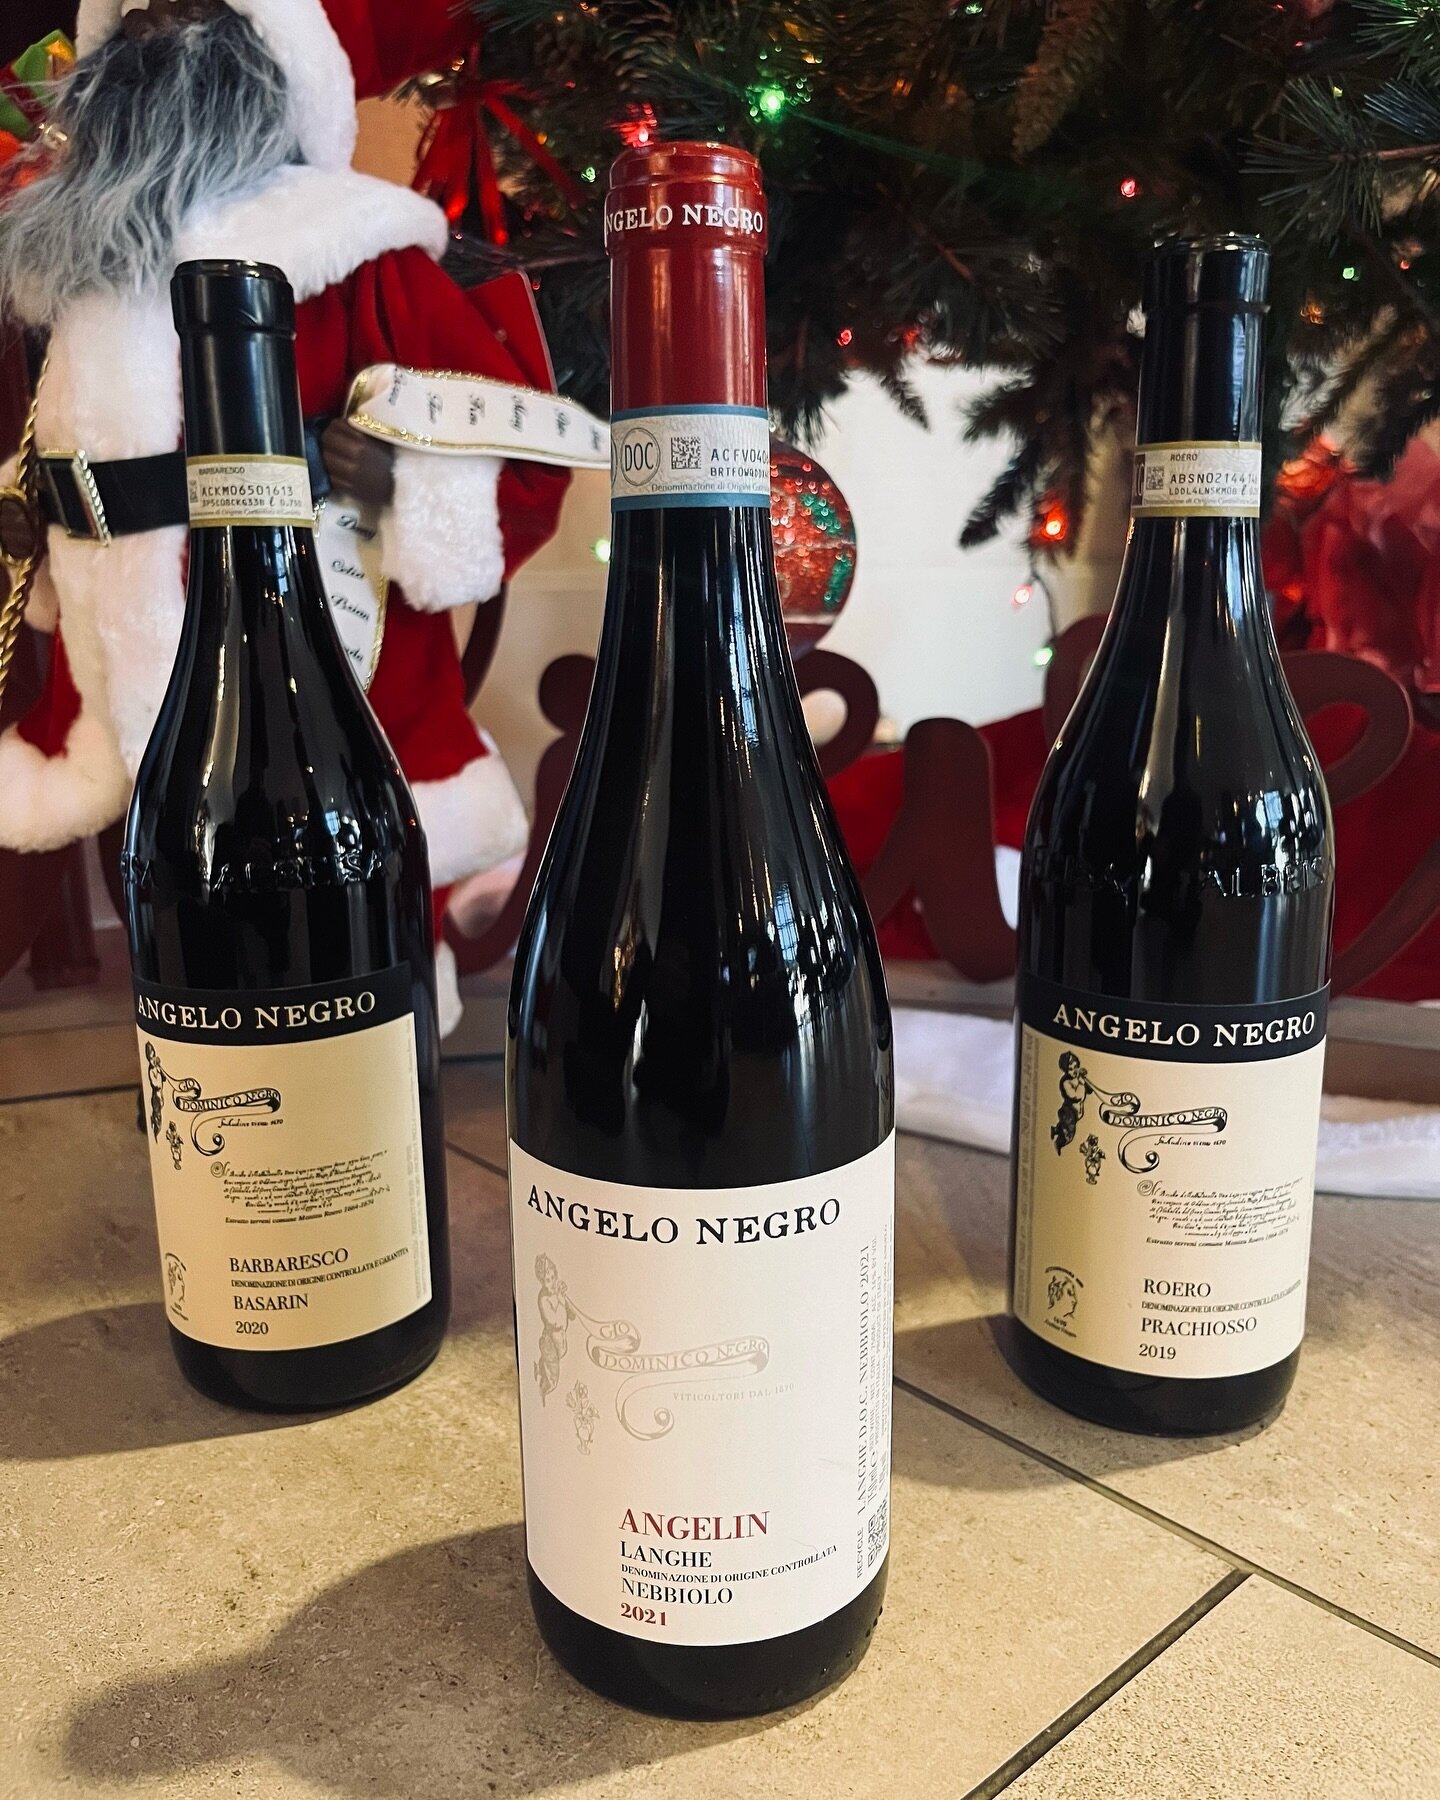 It&rsquo;s time to ring in the holidays and who better to do it with than the First Family of the Roero. Whatever the occasion is, @angelo_negro_winery has a bottling that suits the moment and will put you on everyone&rsquo;s nice list.
 
Take your p